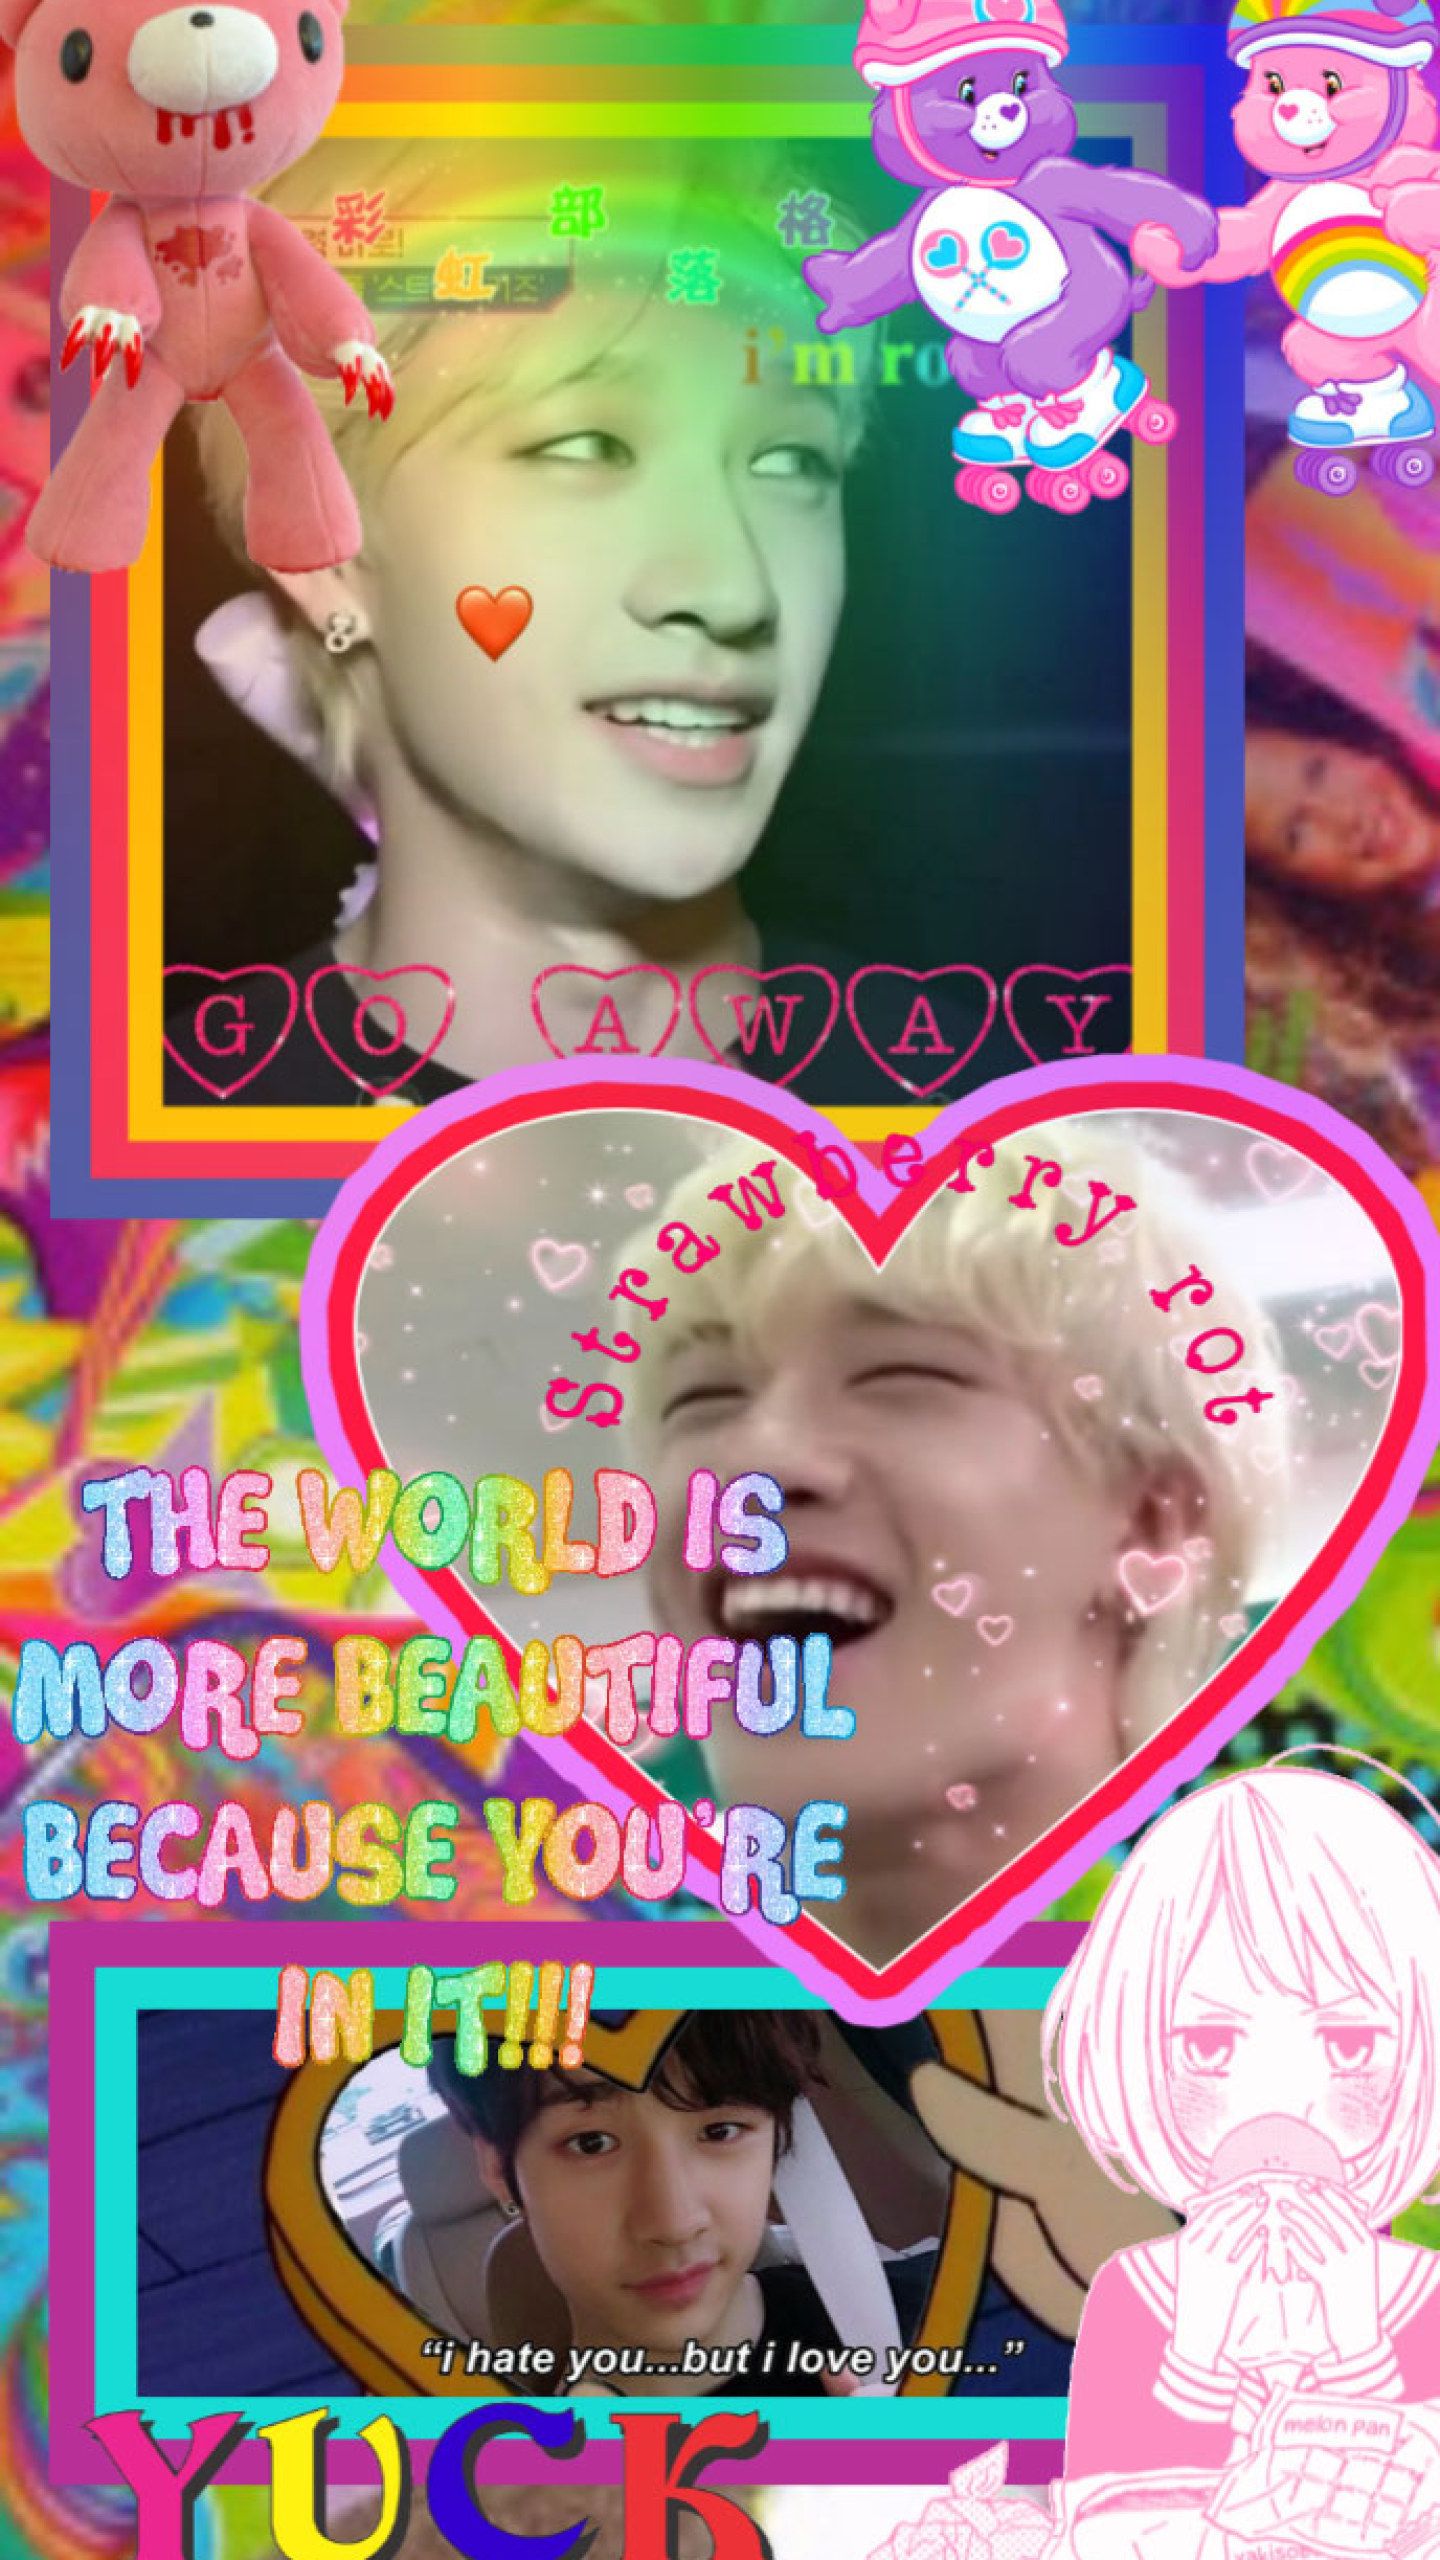 A collage of images of Jimin from BTS, surrounded by hearts and positive messages. - Cute, kidcore